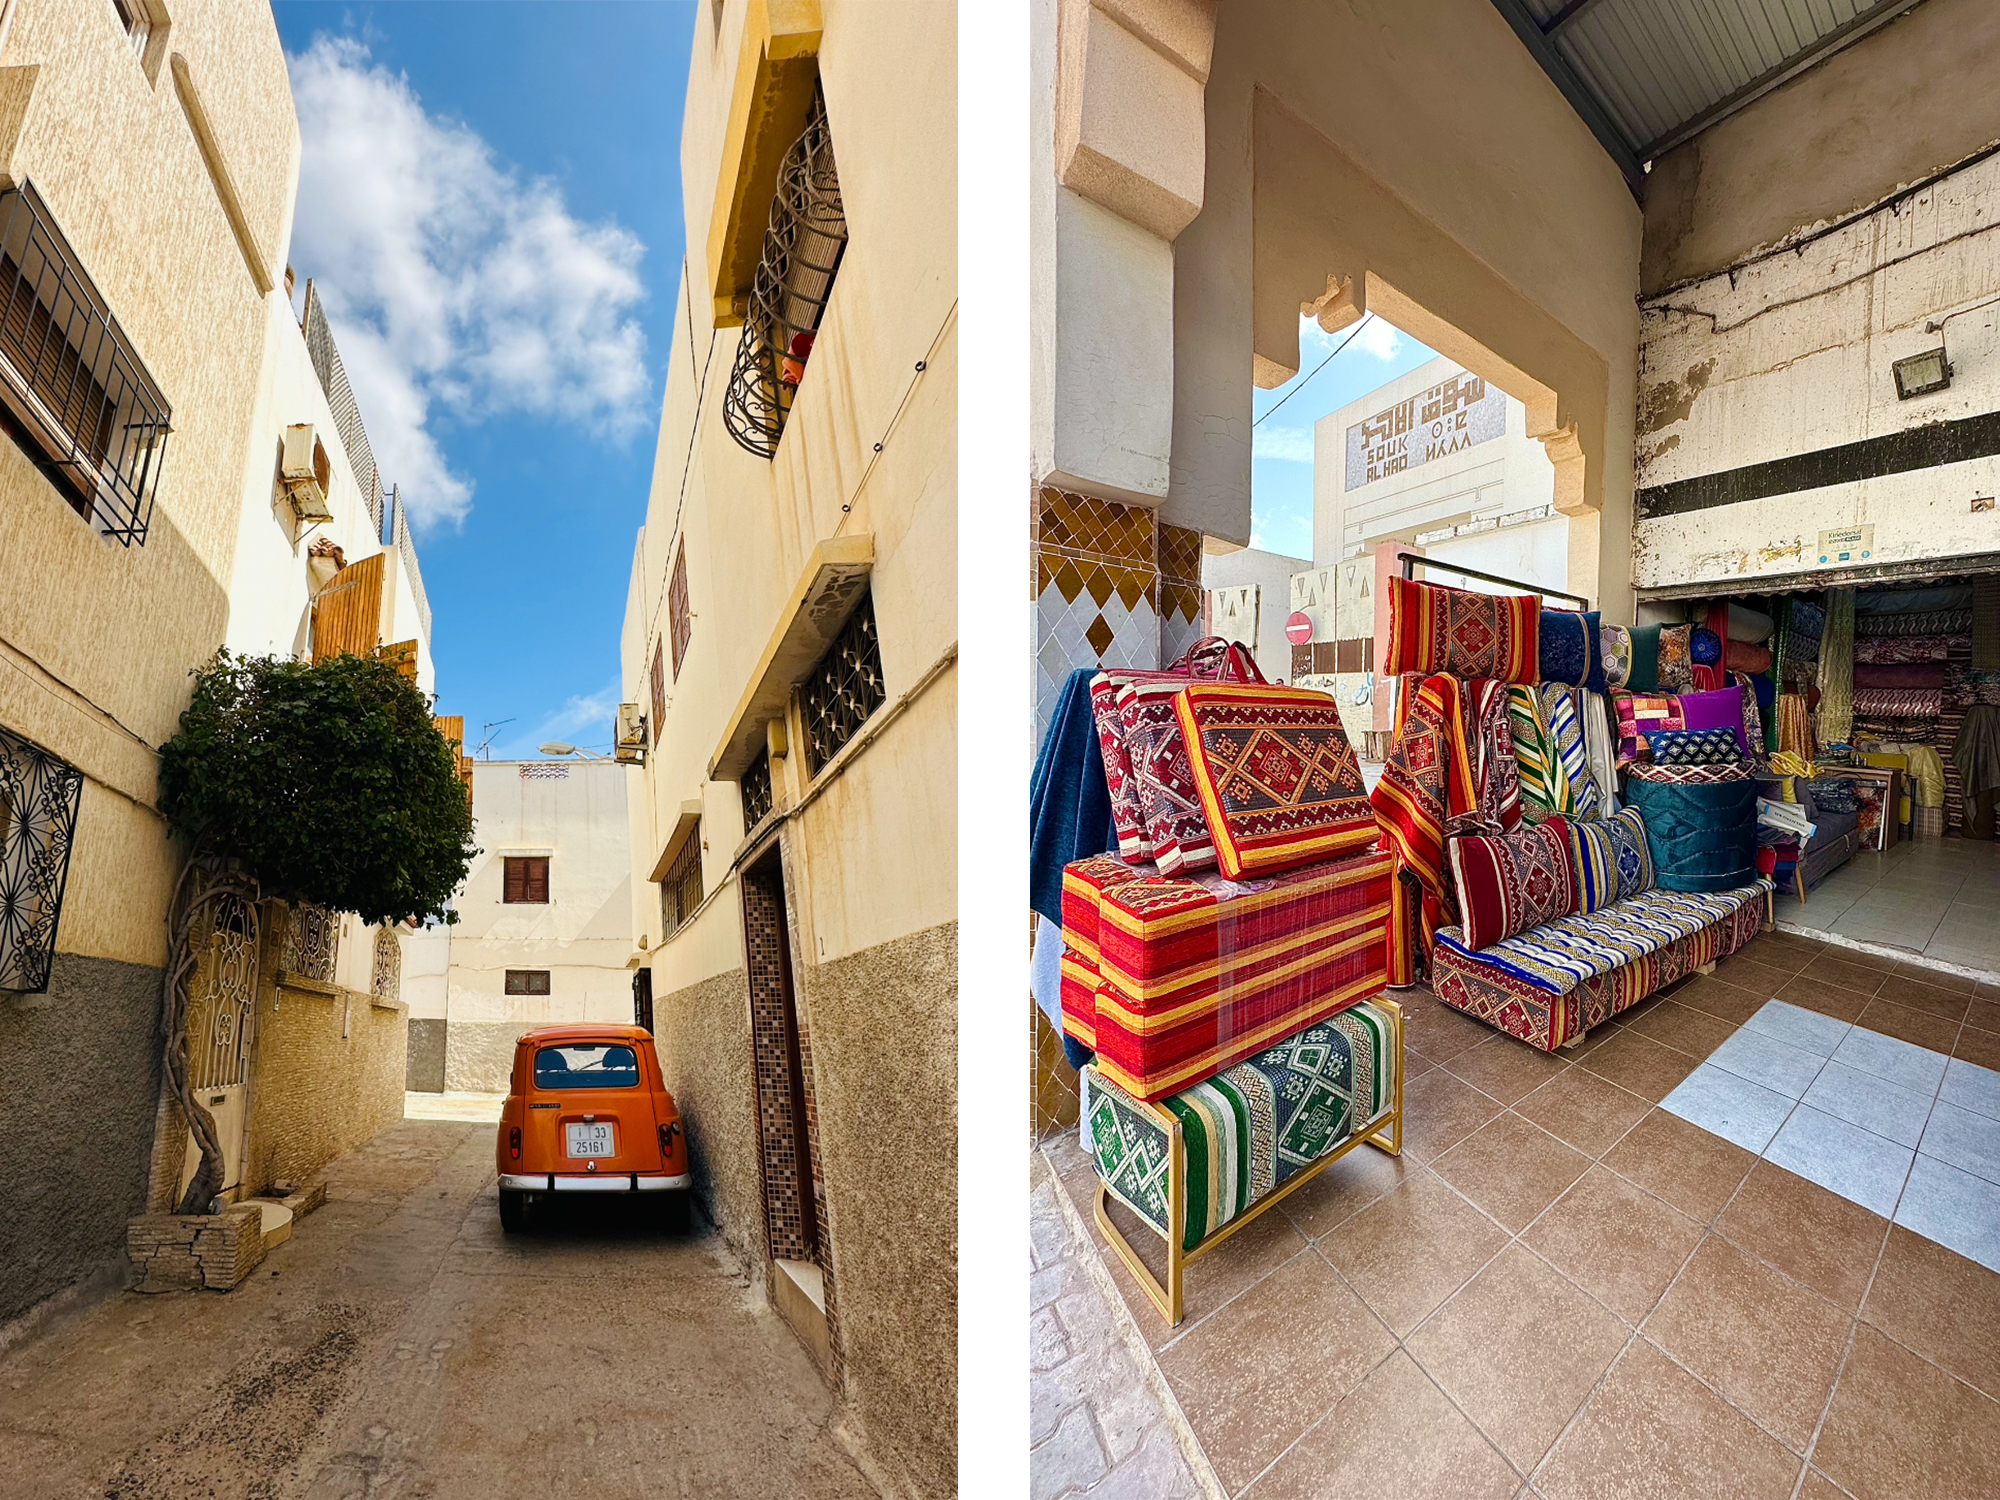 Euphoric Threads Travel Blog - Euphoric Escapades - The Adventures of Griffindor - The Ultimate Travel Guide to Shopping in Morocco. Agadir 